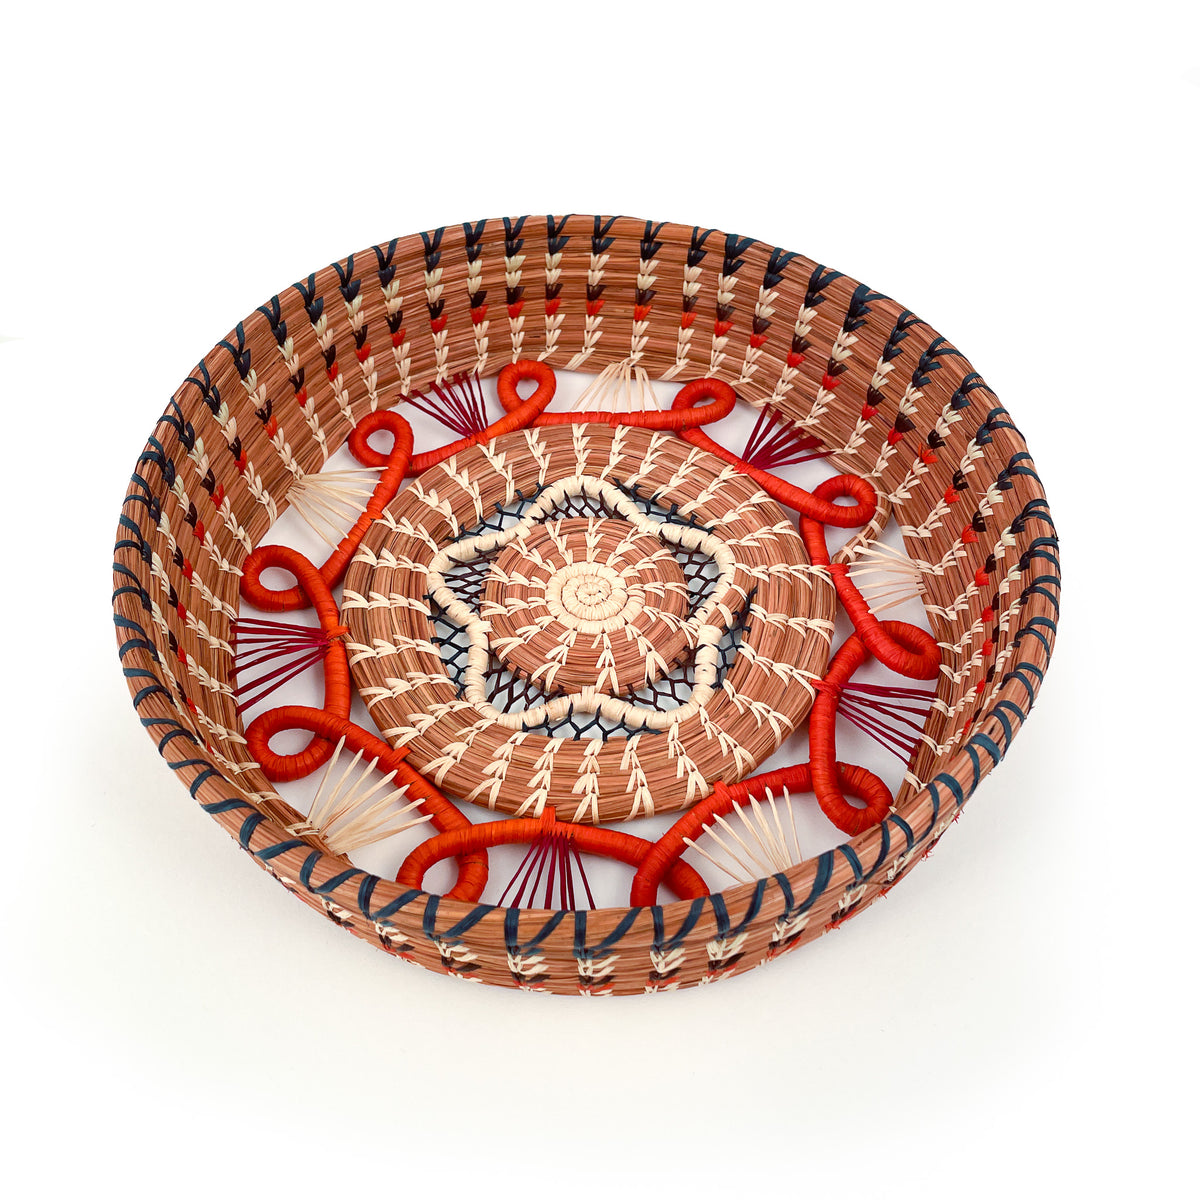 Front-facing view of Cristina basket looking down into circular handwoven pine needle basket with star-shaped accent in center, surrounded by orange loop detail and intricate raffia stitching